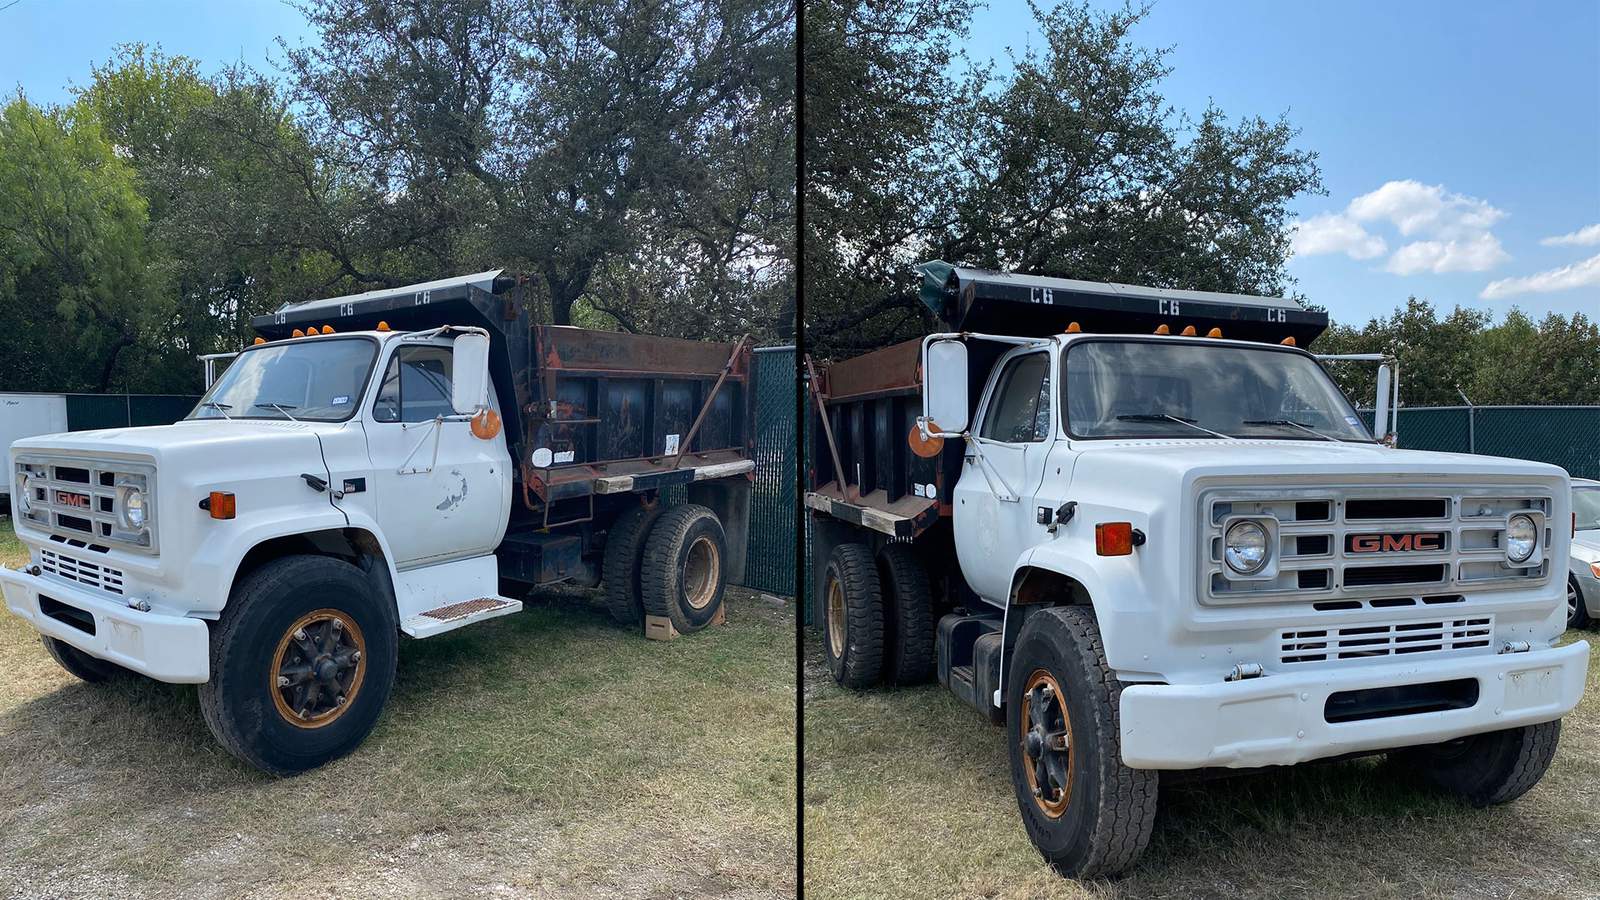 Dump truck, other impounded vehicles up for online auction via Leon Valley PD